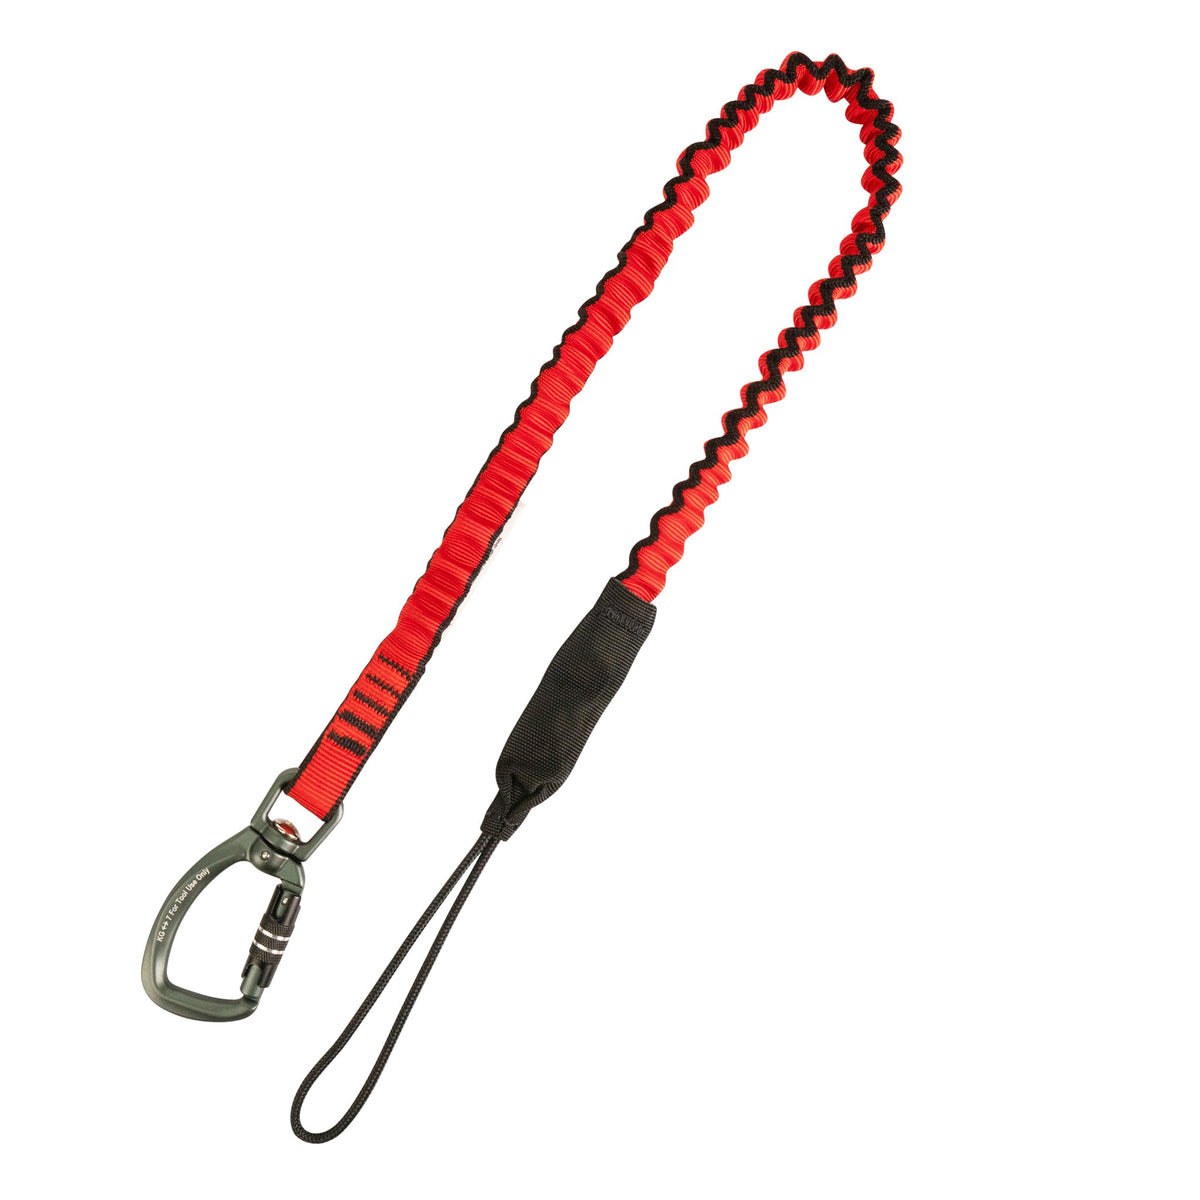 Bungee Tether Dual-Action Swivel Carabiner - 7kg / 15lb (Each / 10 Pack)